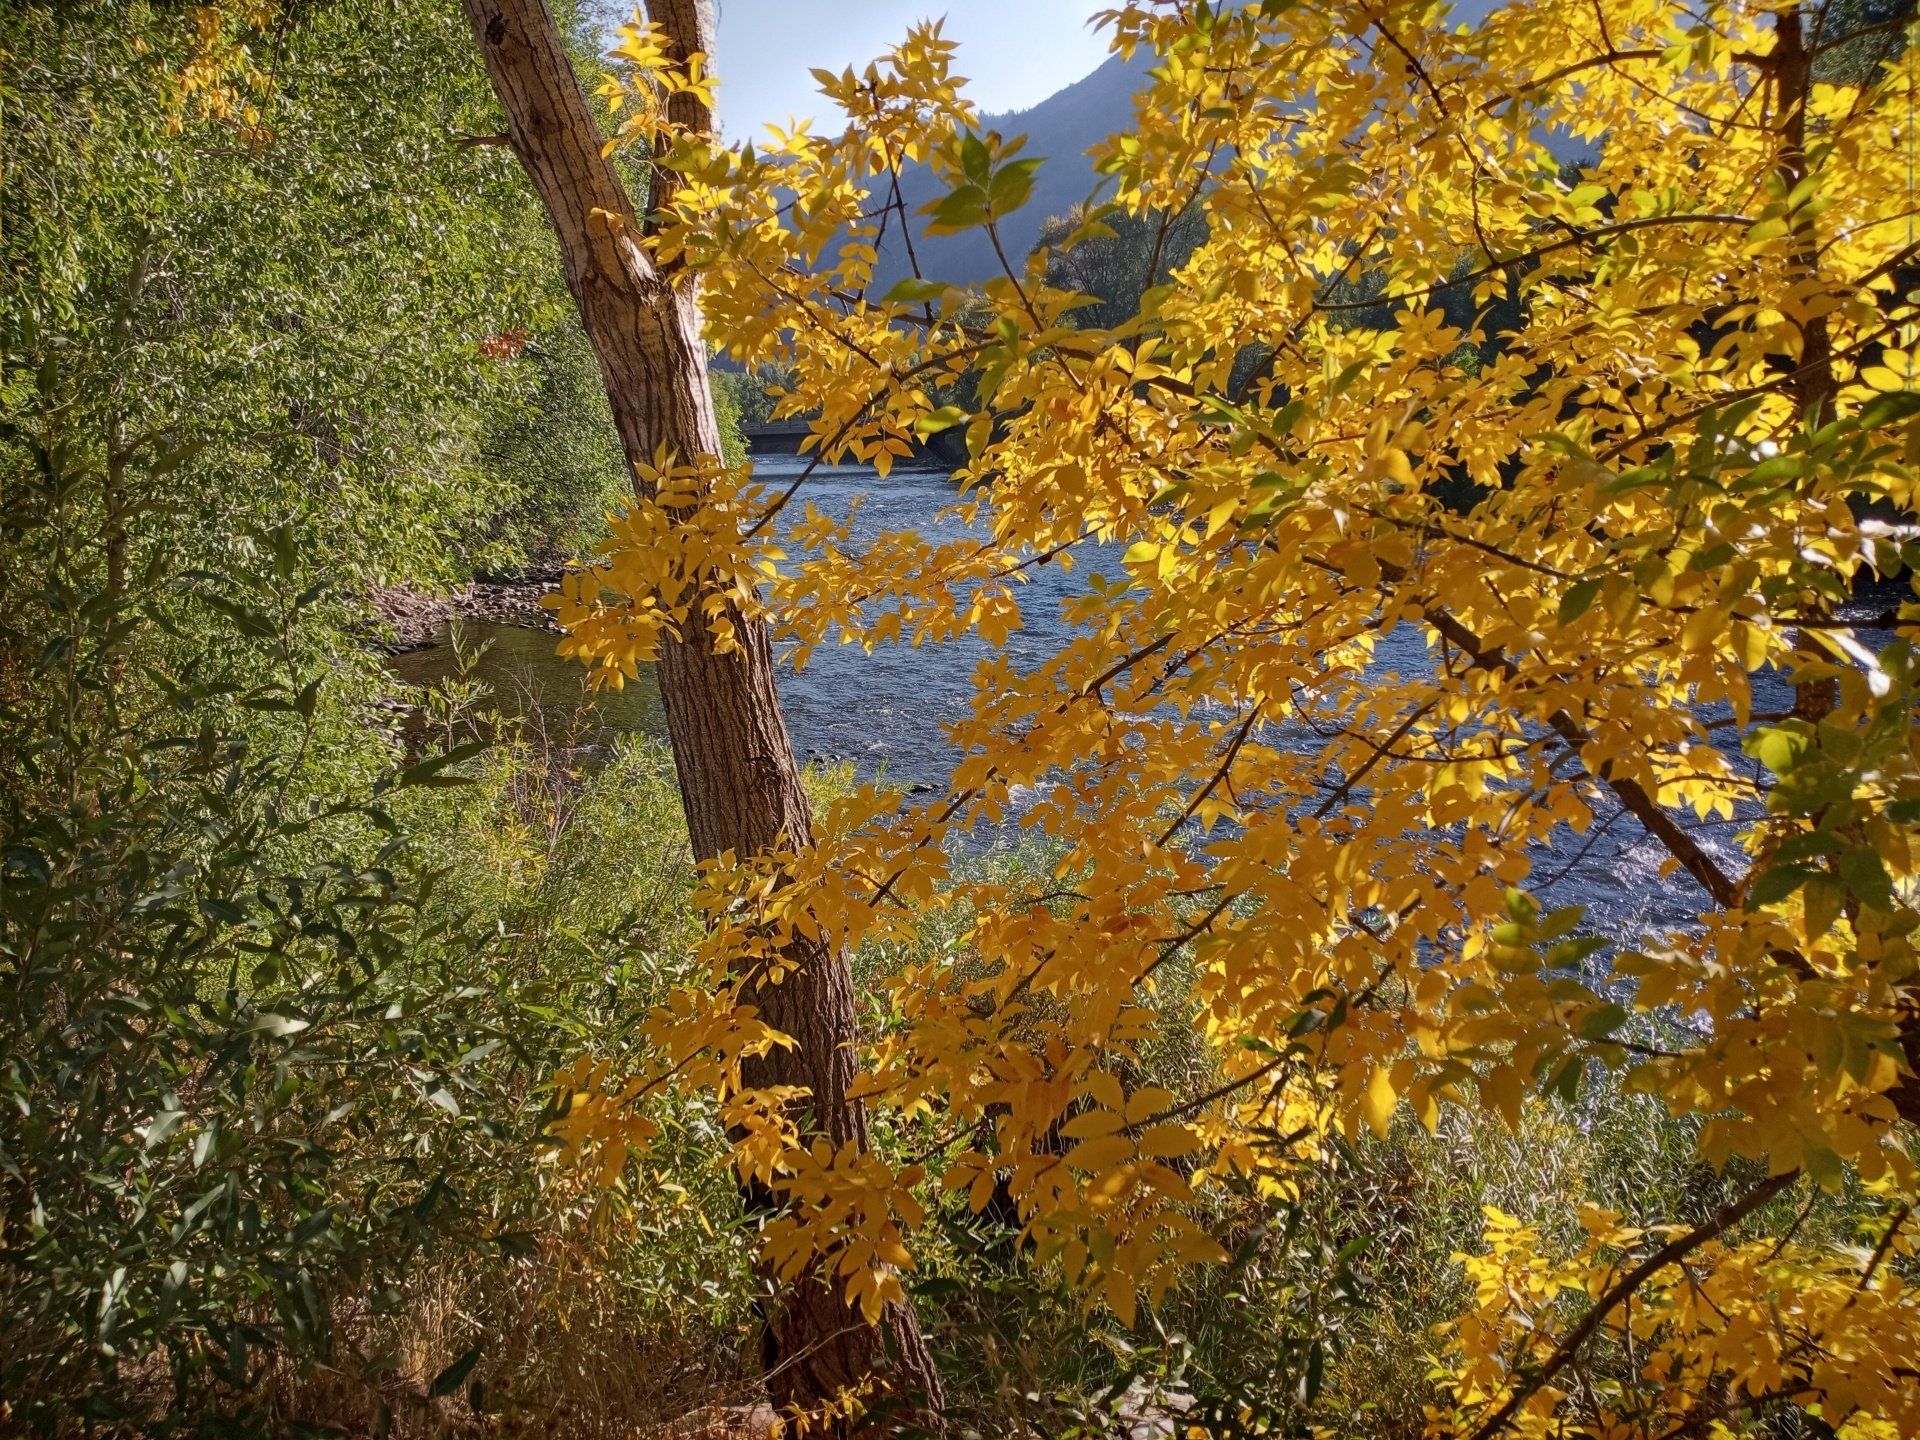 bright gold leaves on tree in front of river with greenery alongside